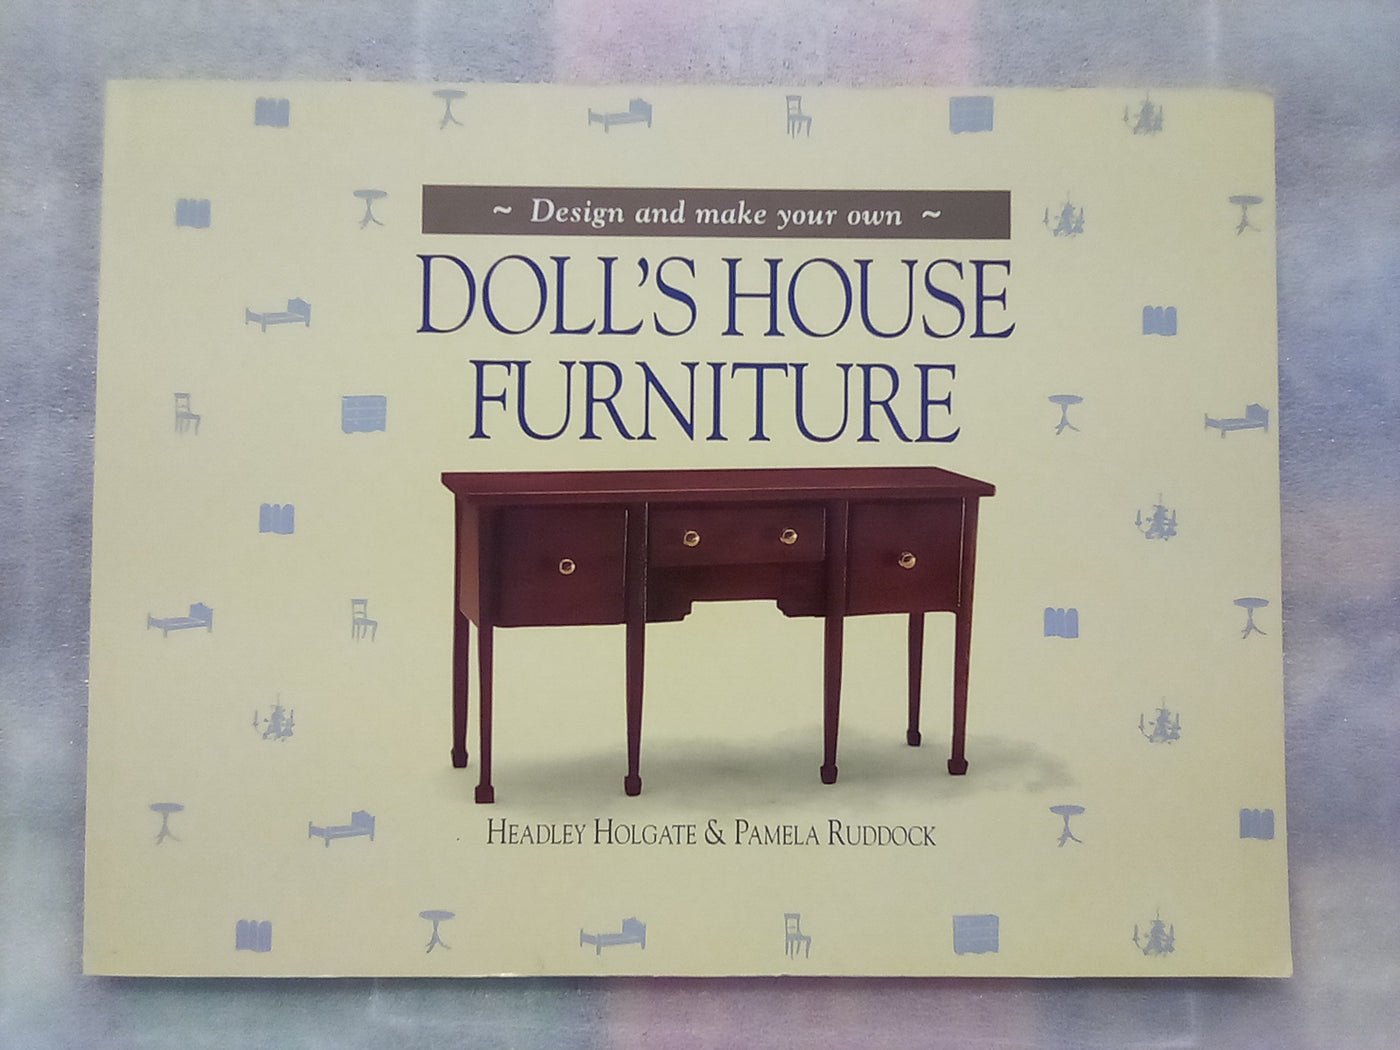 Doll's House Furniture - Design & Make Your Own